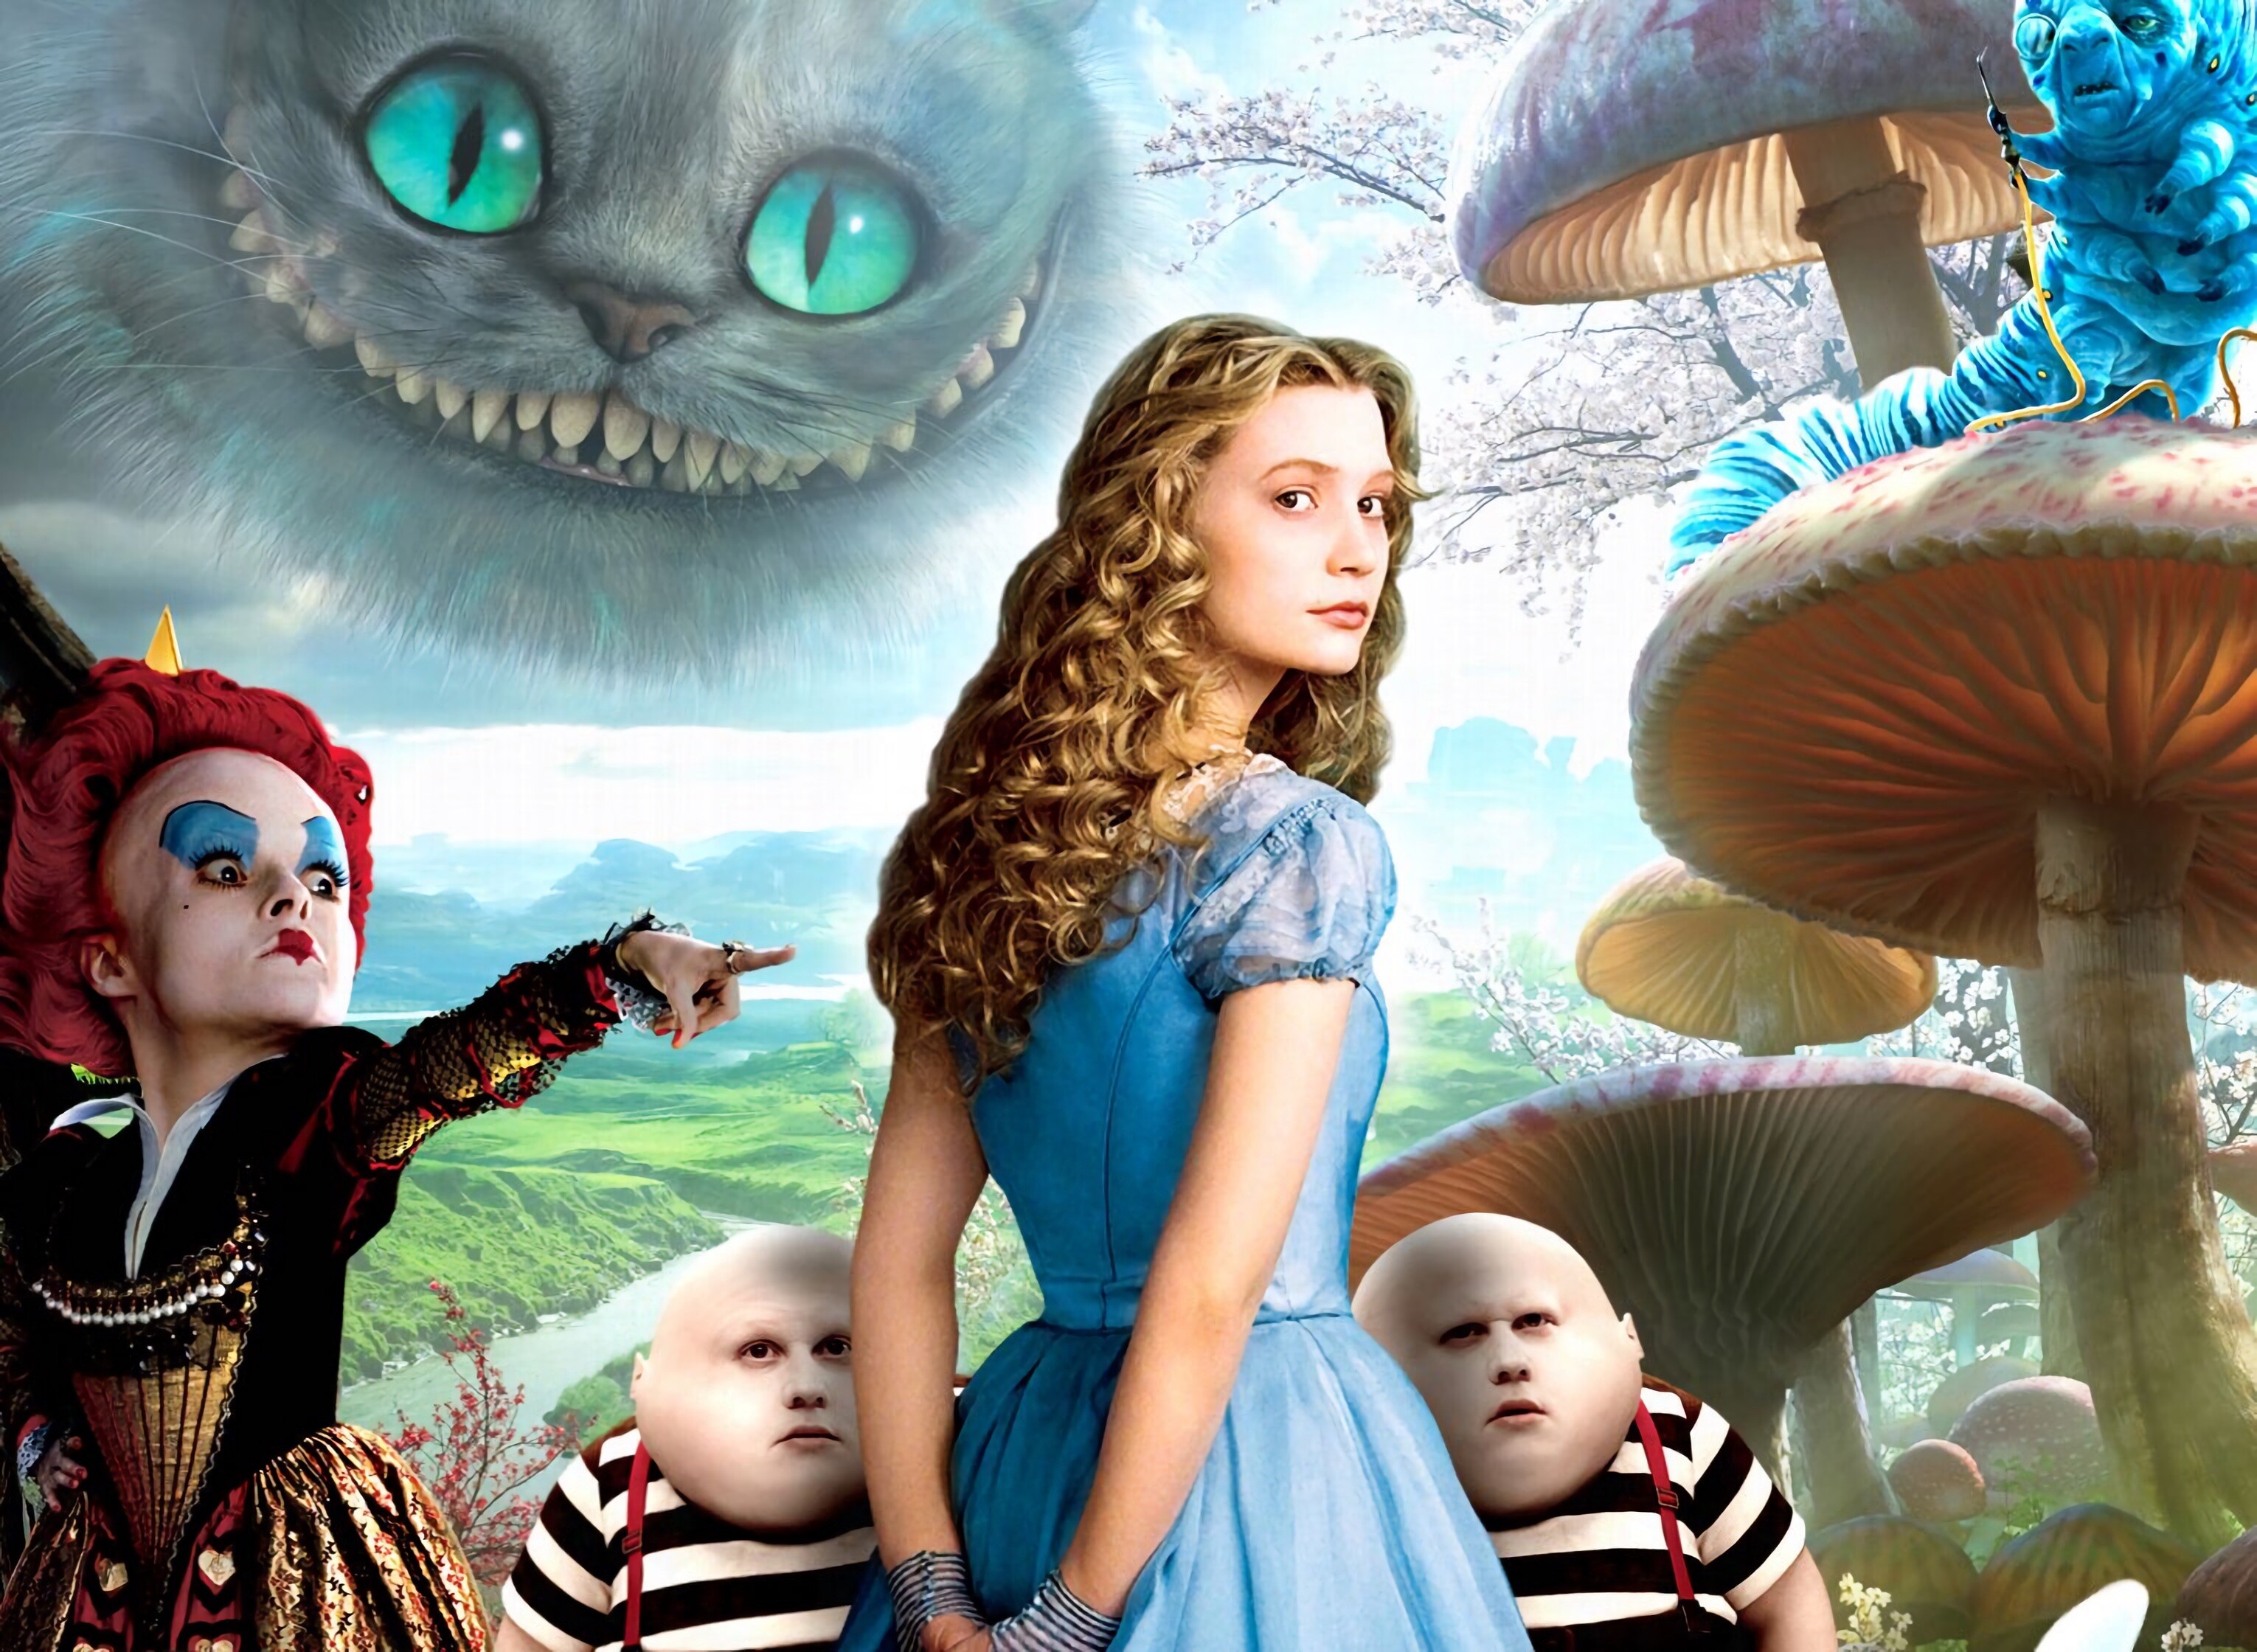 Alice in Wonderland, Fantastical journey, Whimsical characters, Magical world, 3060x2240 HD Desktop